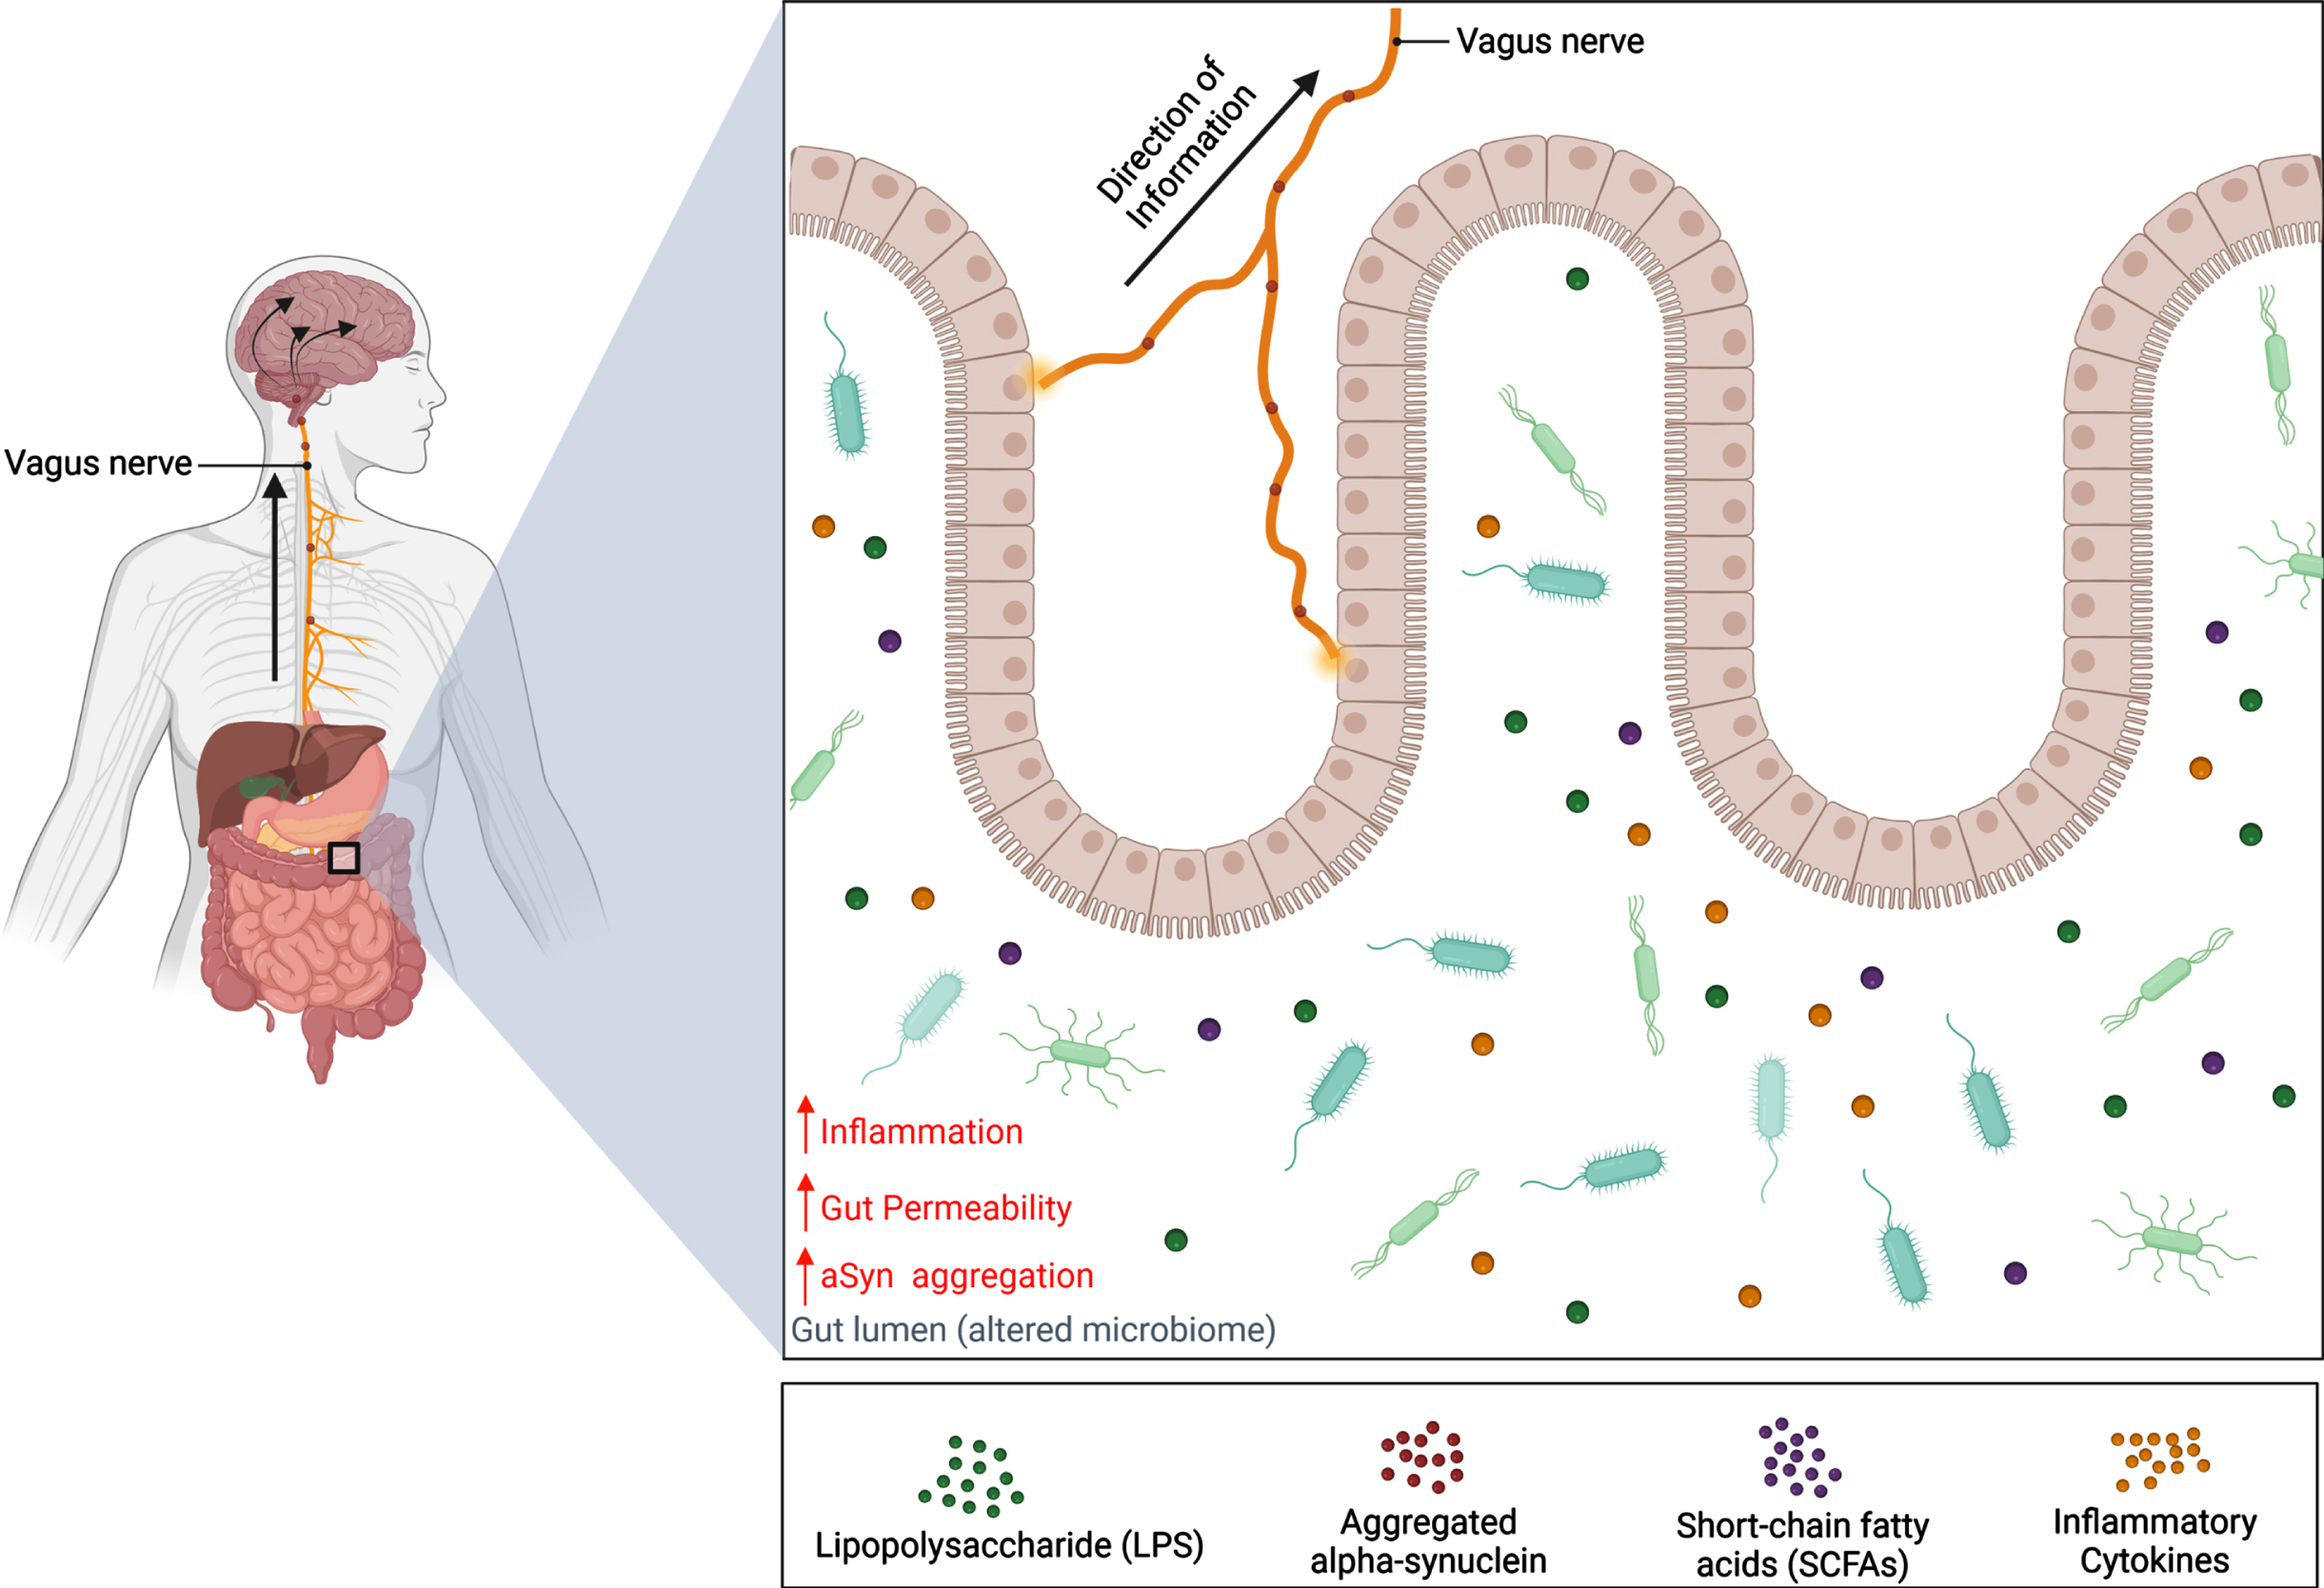 Schematic representation of the gut-brain axis in Parkinson’s disease. Alternations of the microbiota composition can be caused by various factors such as genetics and environmental risks. Dysbiosis of the microbiome can contribute to PD pathology in the gut before spreading to the brain via the vagus nerve. This results in a decrease in abundance of beneficial bacteria and a reduction of their metabolites, SCFAs, which have been shown to lower inflammation and gut permeability. Meanwhile, the abundance of harmful bacteria increases, along with the release of endotoxins like LPS. It is hypothesized that these endotoxins can increase inflammatory cytokine expression and cause the gut to become permeable for bacteria and endotoxins to enter the CNS and induce aSyn misfolding. Consequently, aSyn pathology can develop in the gut and travel up the vagus nerve where pathogenic aSyn can spread to brain regions in a prion-like manner. Created with BioRender.com.